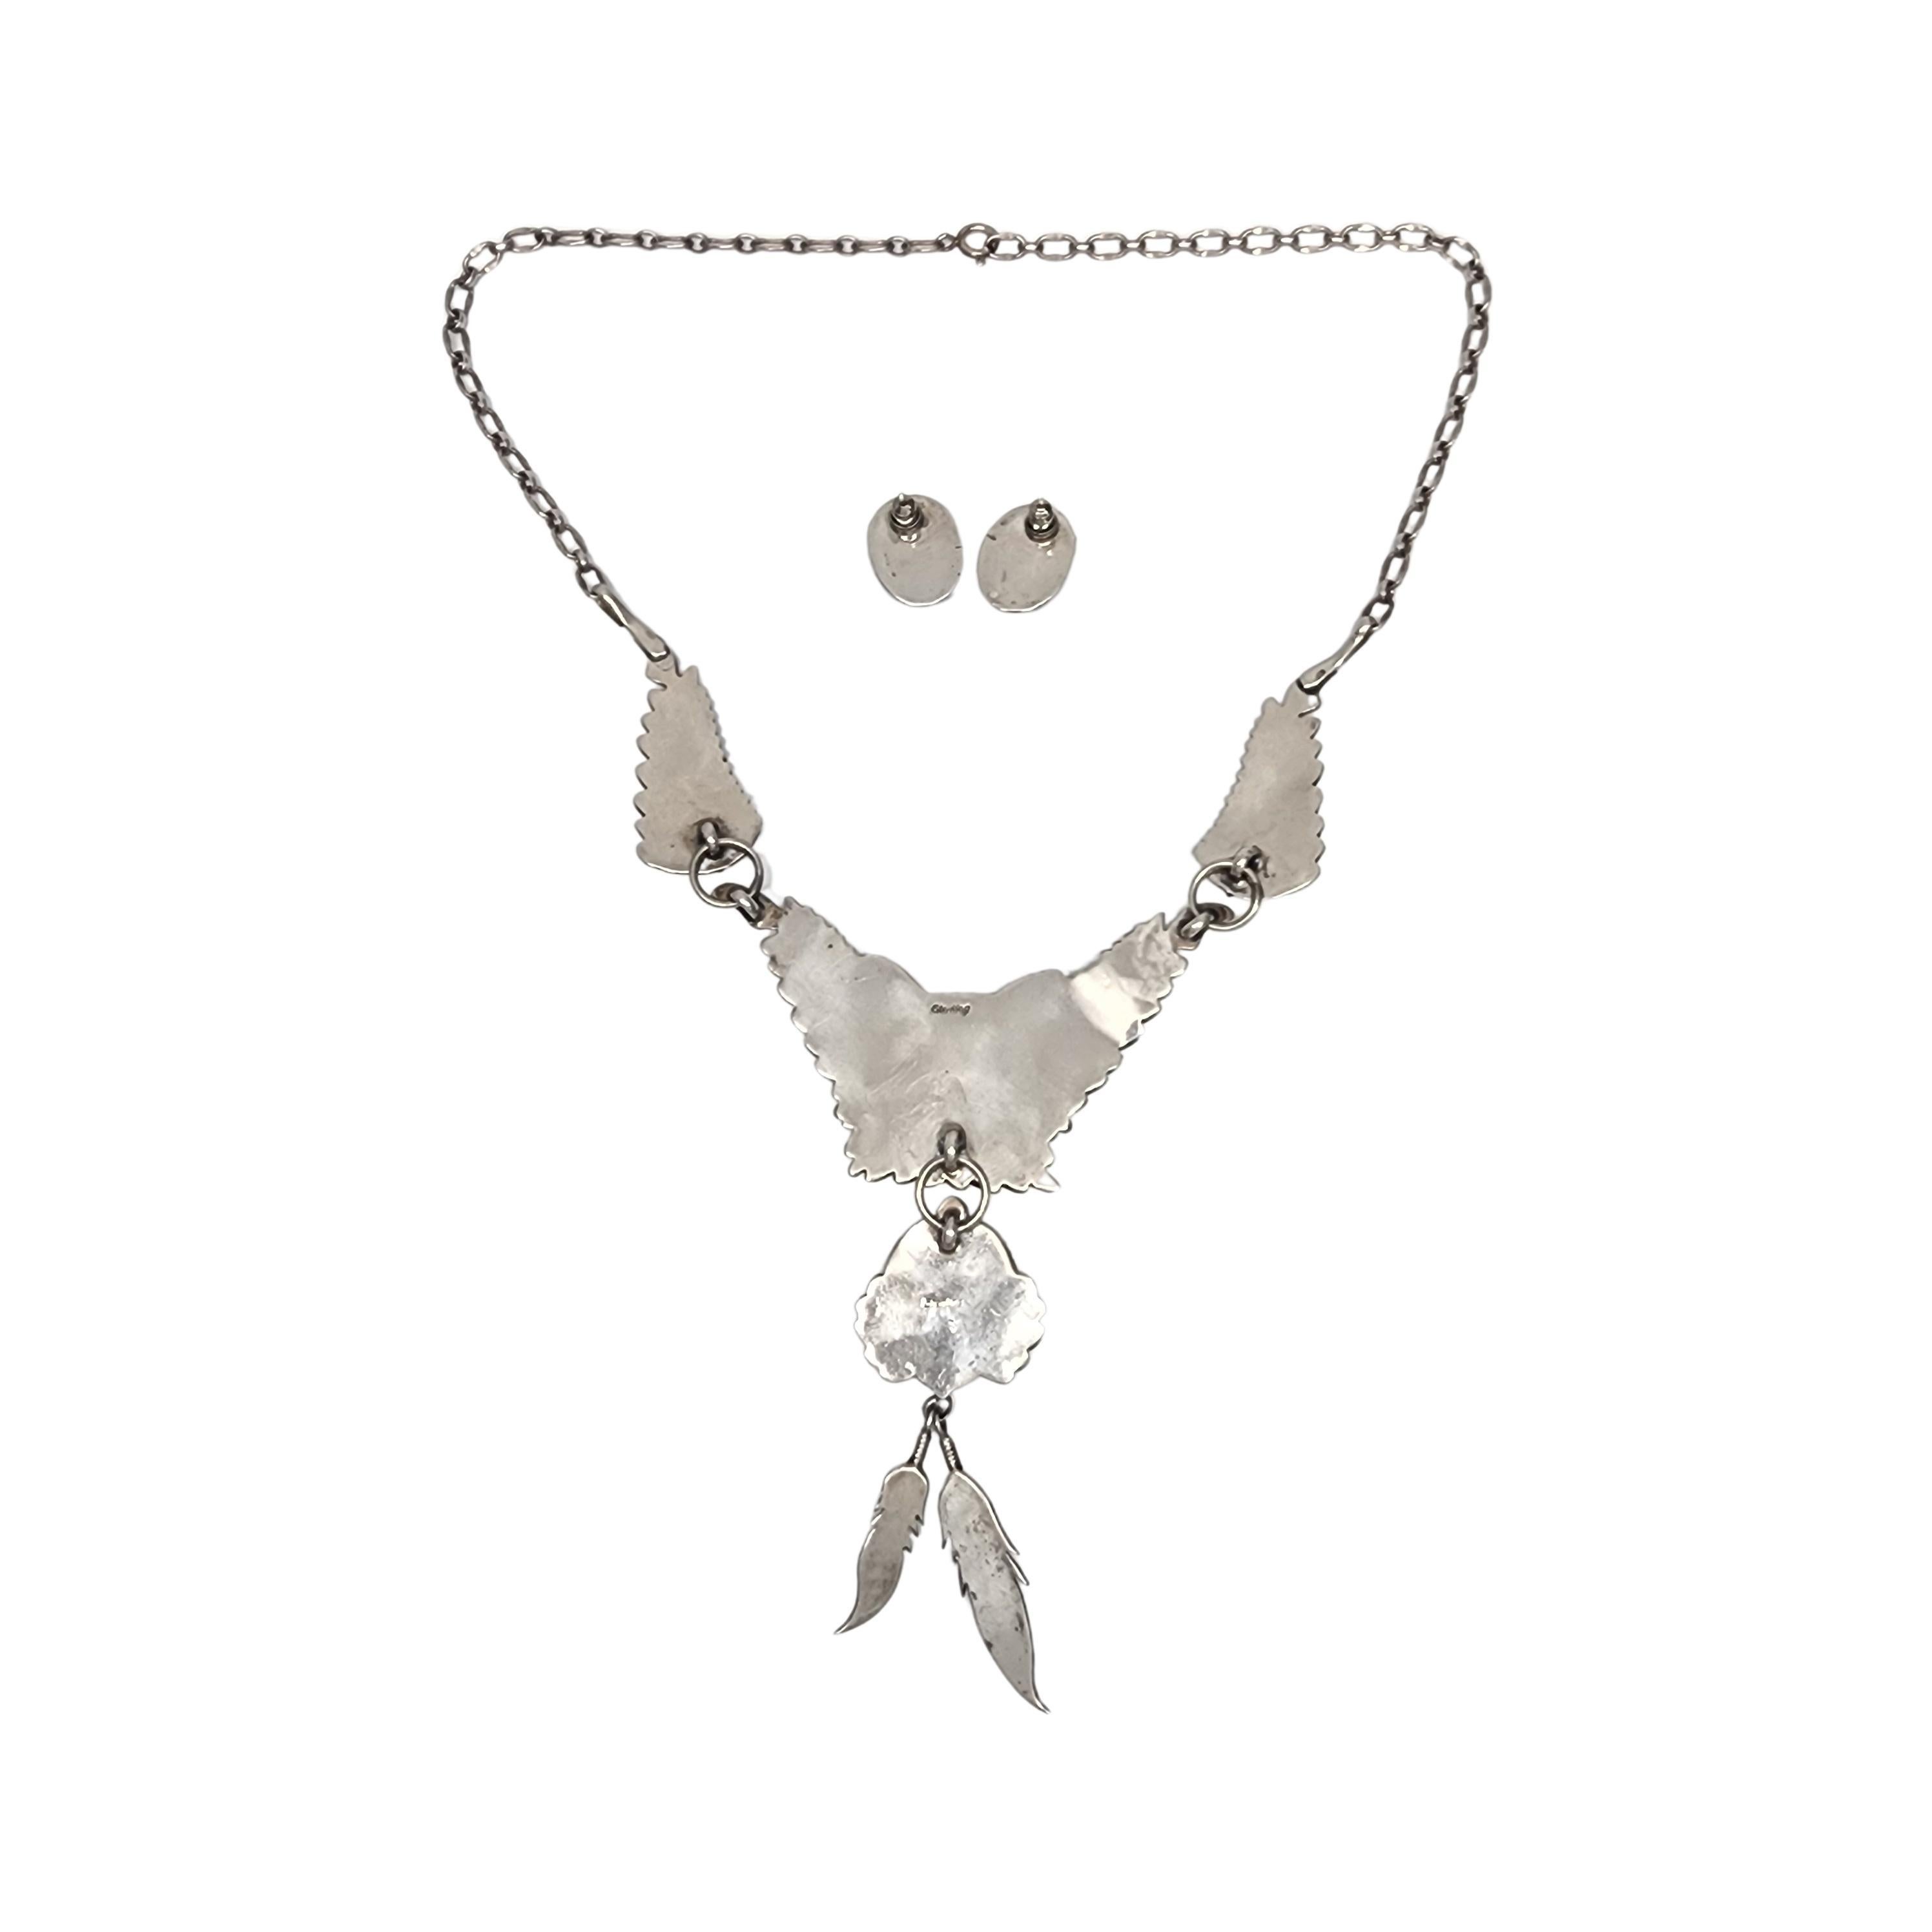 Native American sterling silver and pink shell feather necklace and earrings set.

Beautiful iridescent pink shells adorn this bib necklace featuring feather design and feather dangles. Matching oval saw-tooth bezel set pink shell earrings.

Weighs